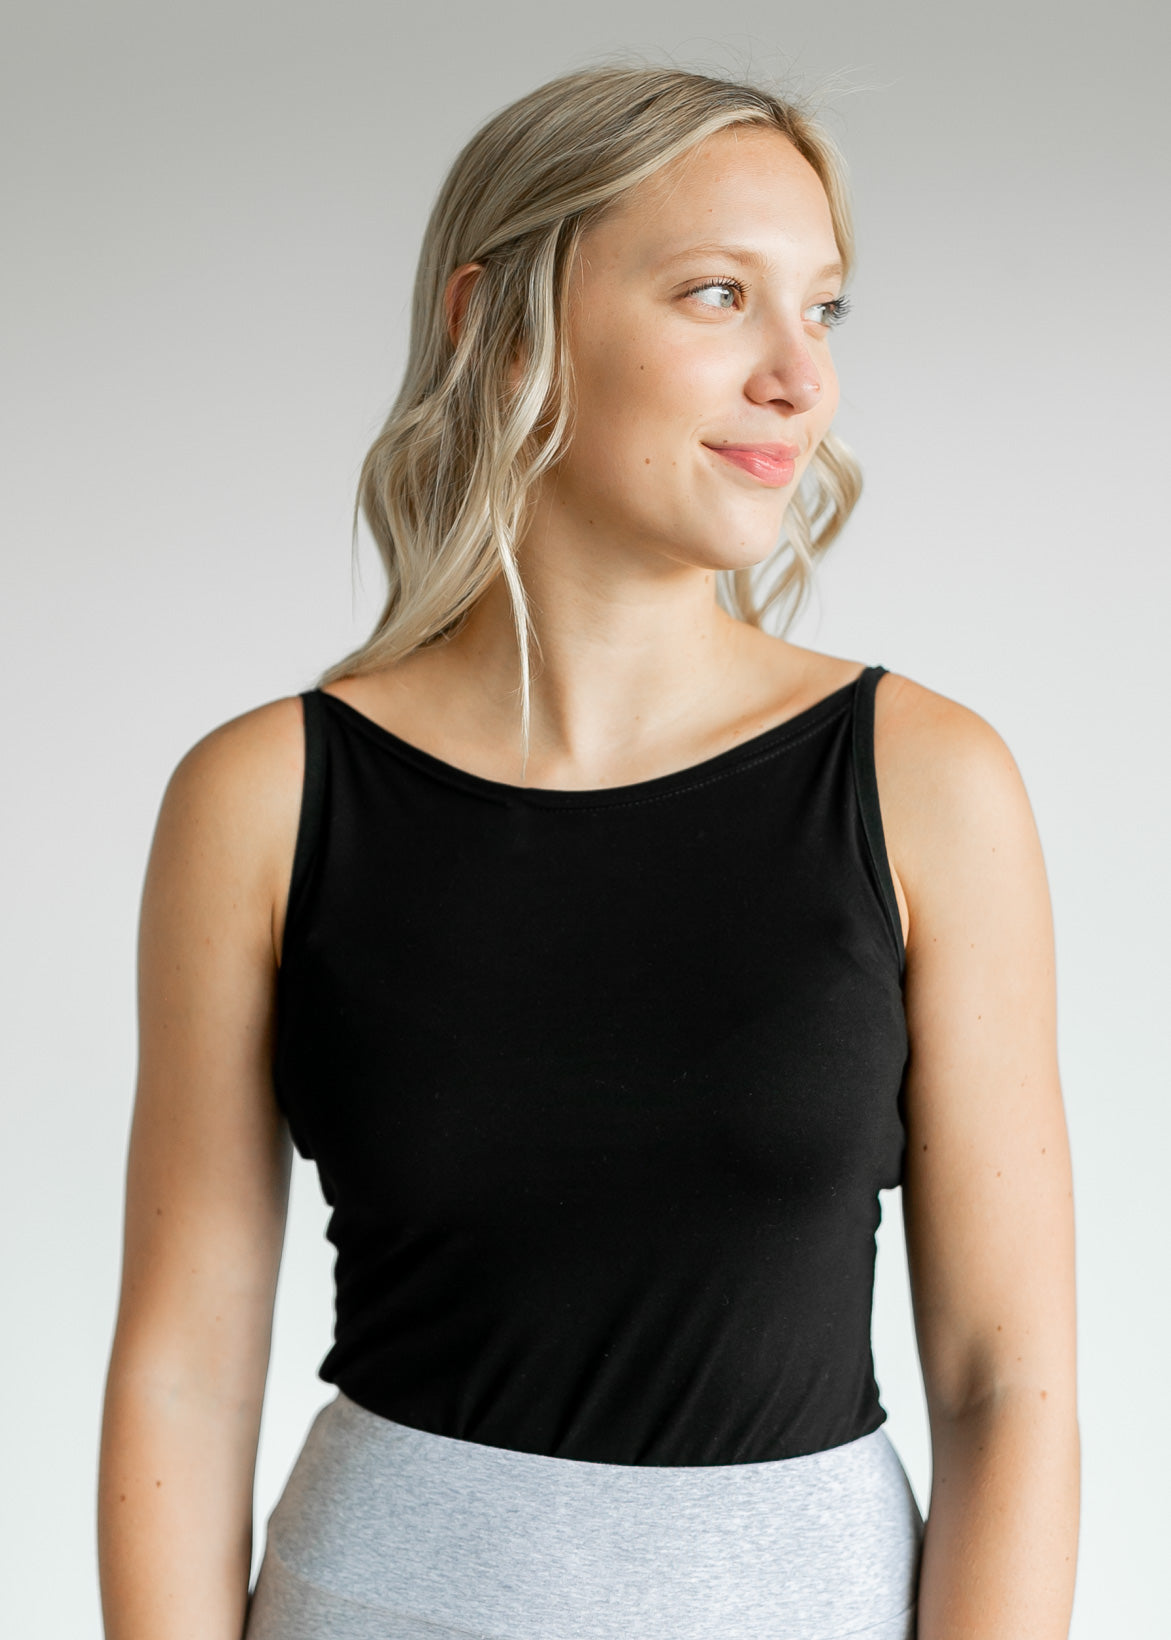 FREE Tank Top with $25 Order  Best Layering Cami For Women